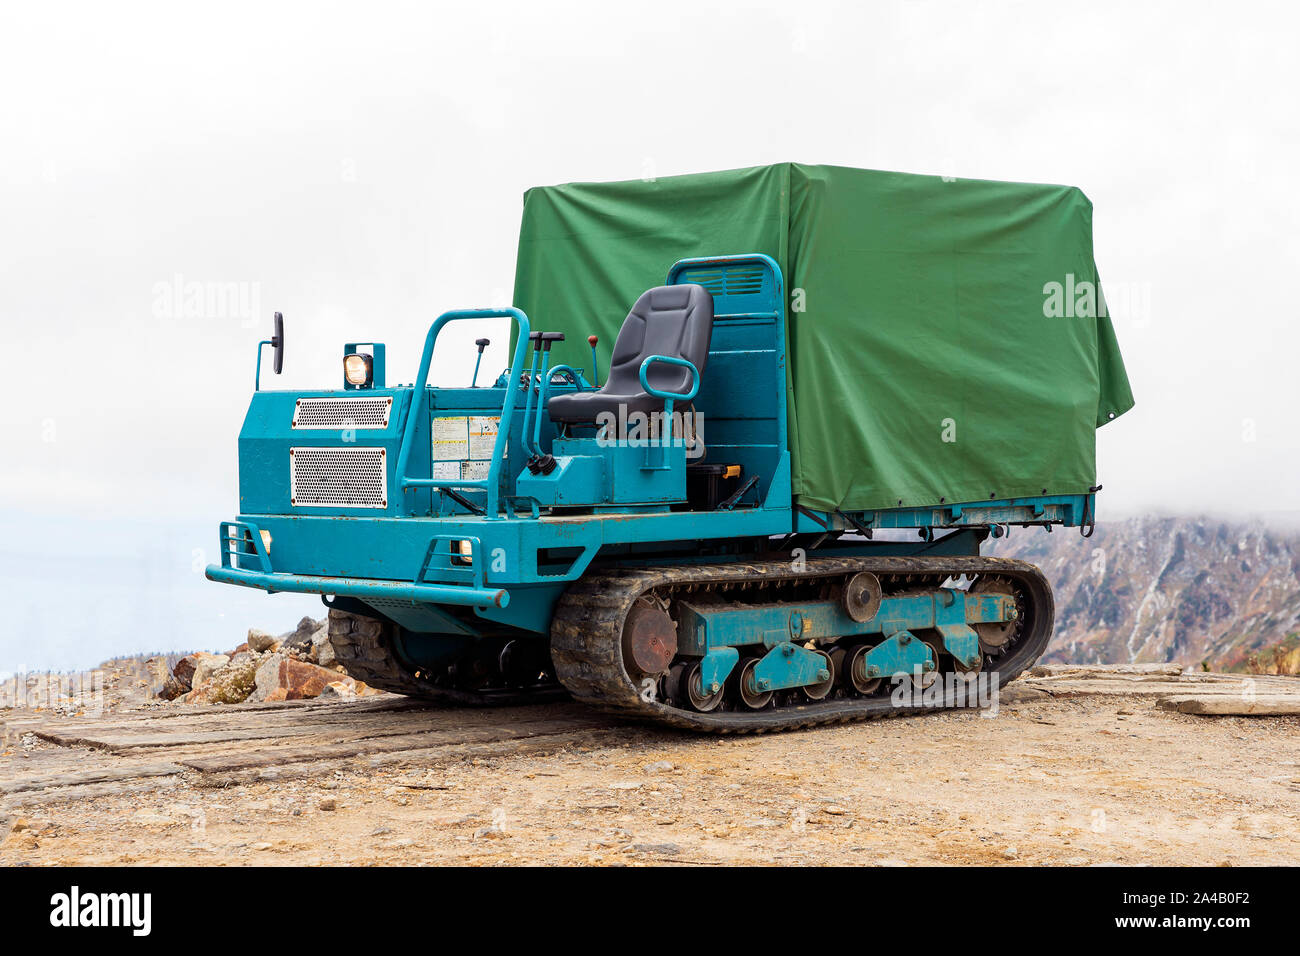 Blue And Green The Land Rover. Cross Country All Terrain Vehicle Has Caterpillar Tracks. Stock Photo